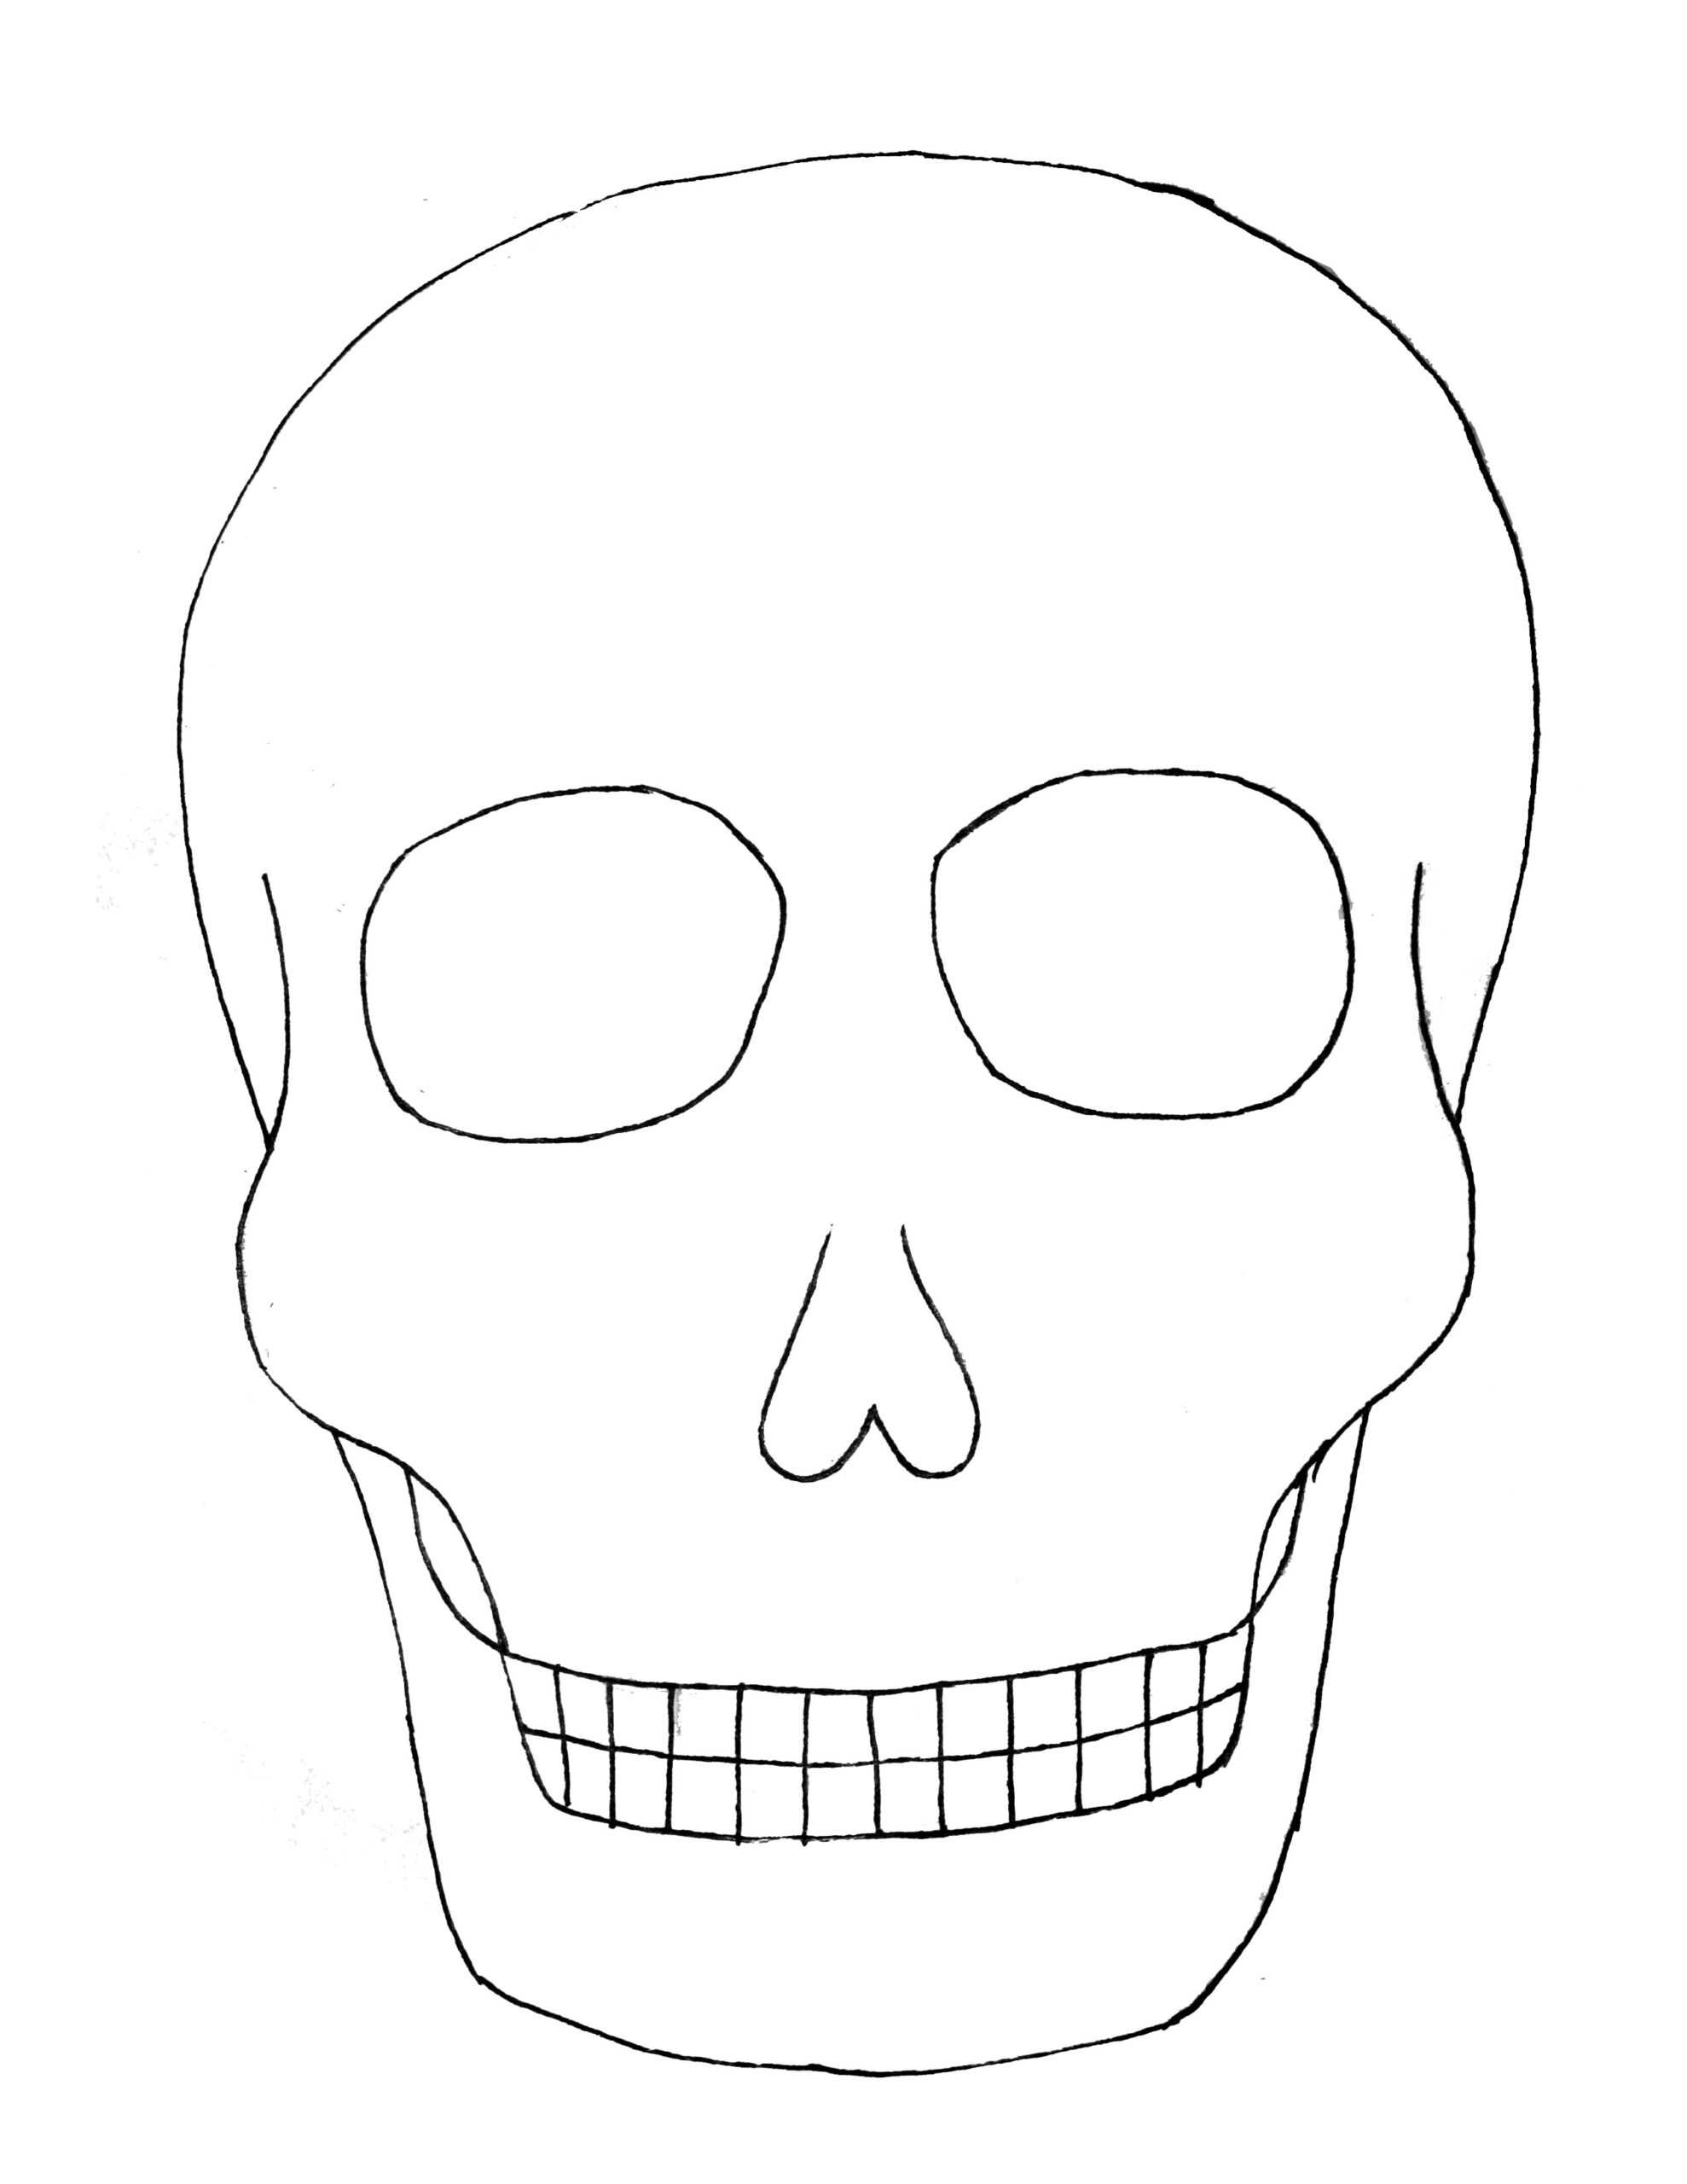 Best Coloring : Day Of The Sugar Skull Blank Template Skulls Intended For Blank Sugar Skull Template